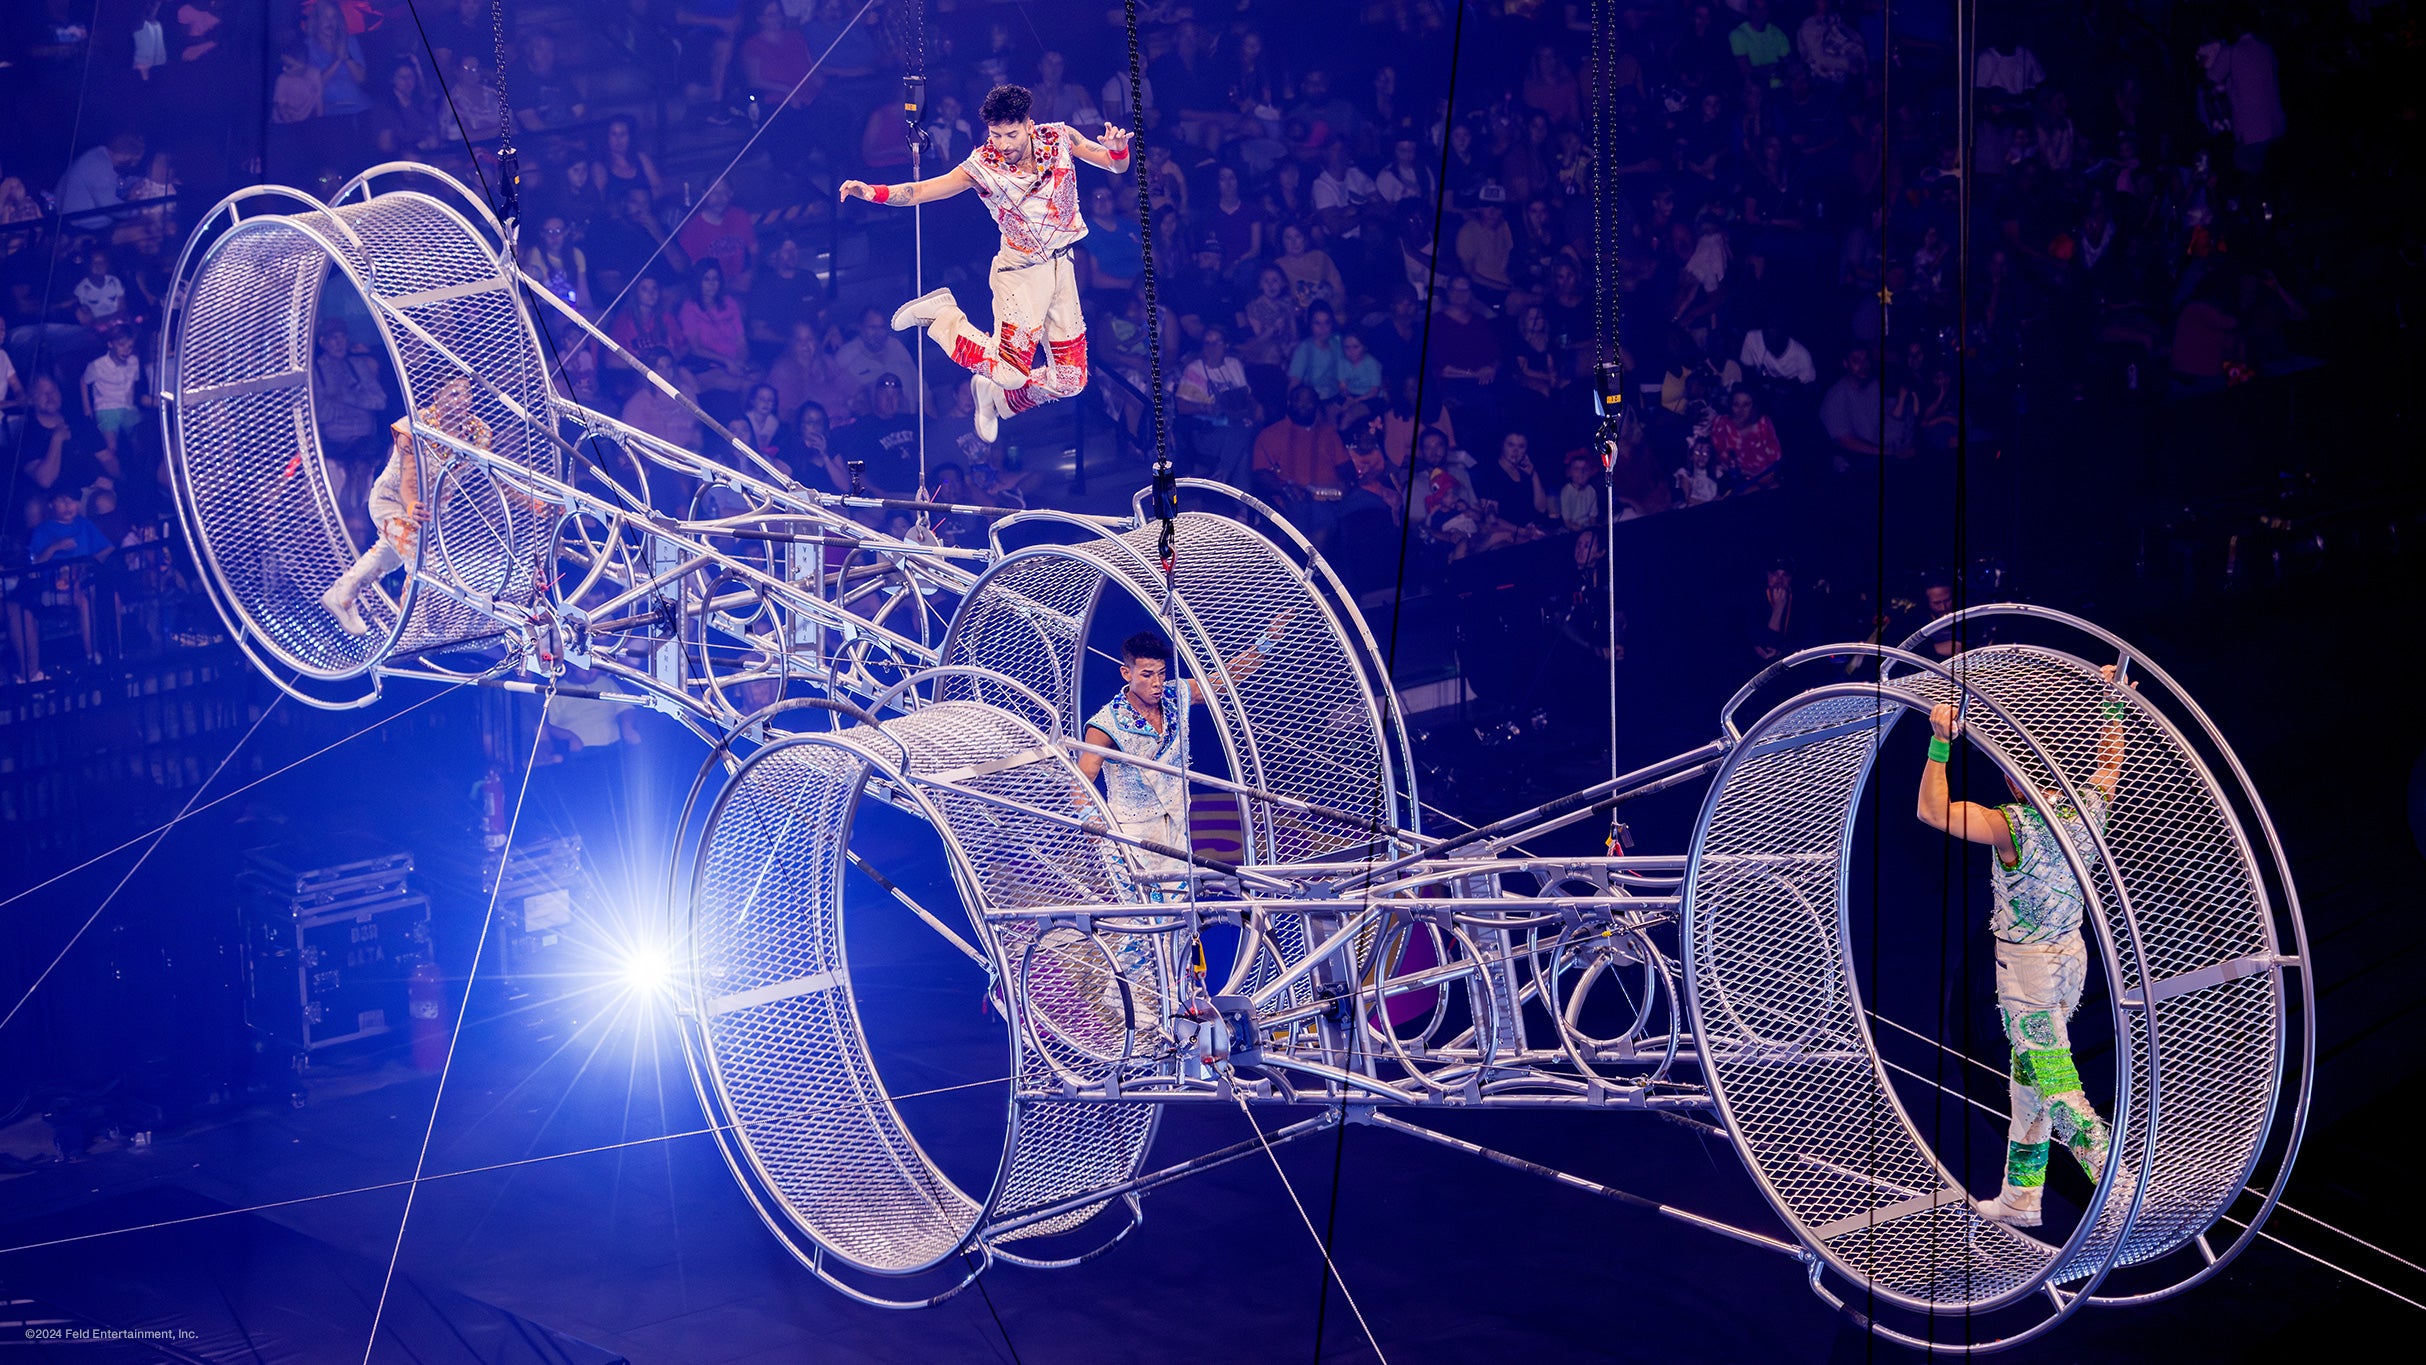 Ringling Bros. and Barnum & Bailey presents The Greatest Show On Earth presales in Anaheim